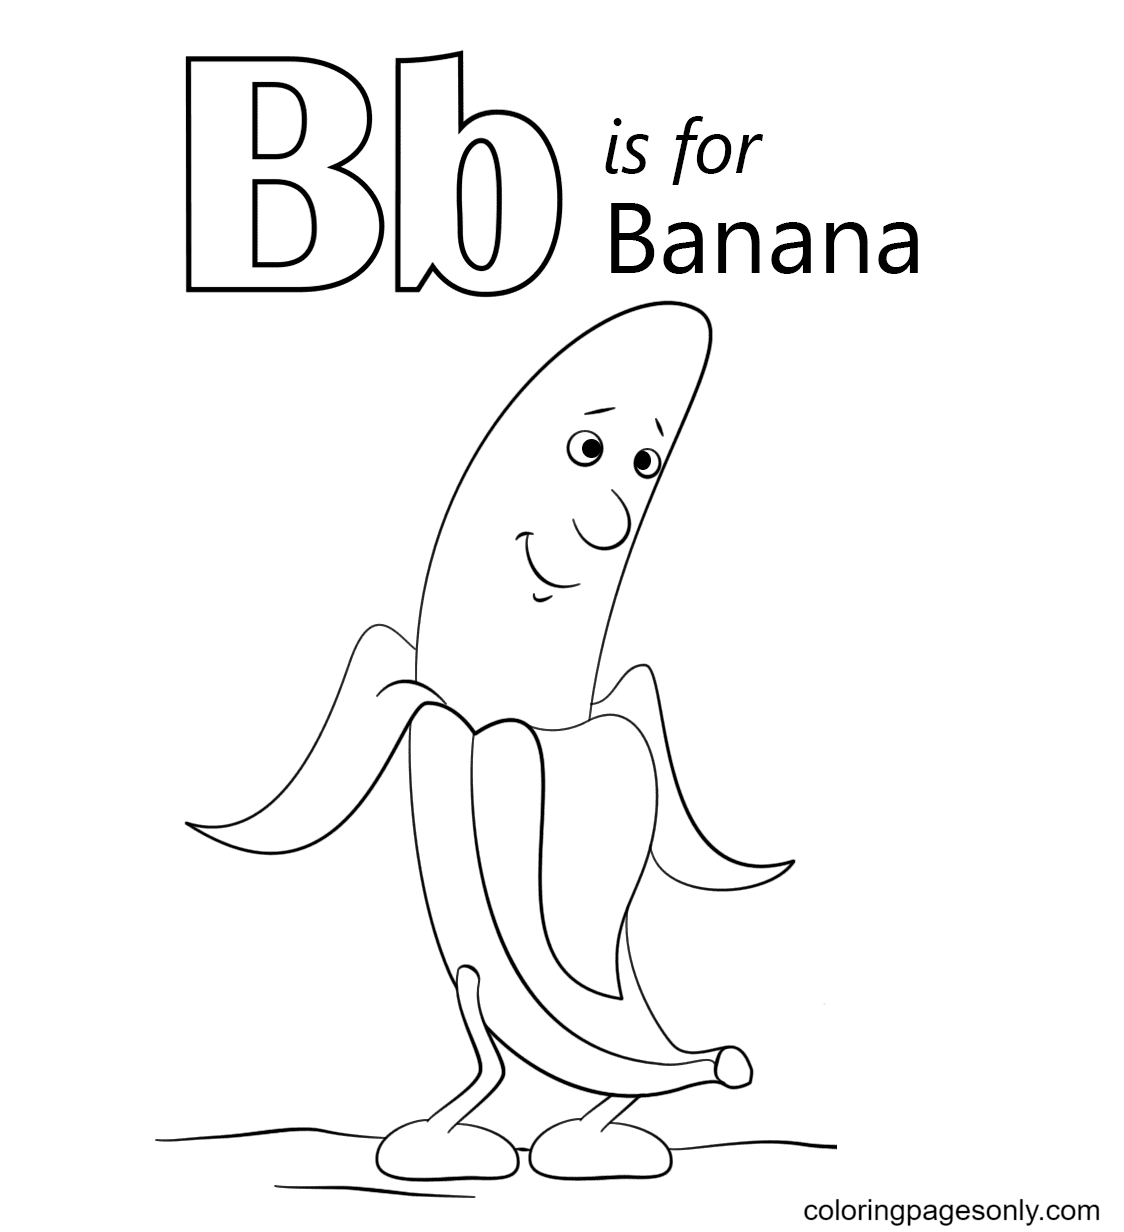 Letter B is for Banana Coloring Pages